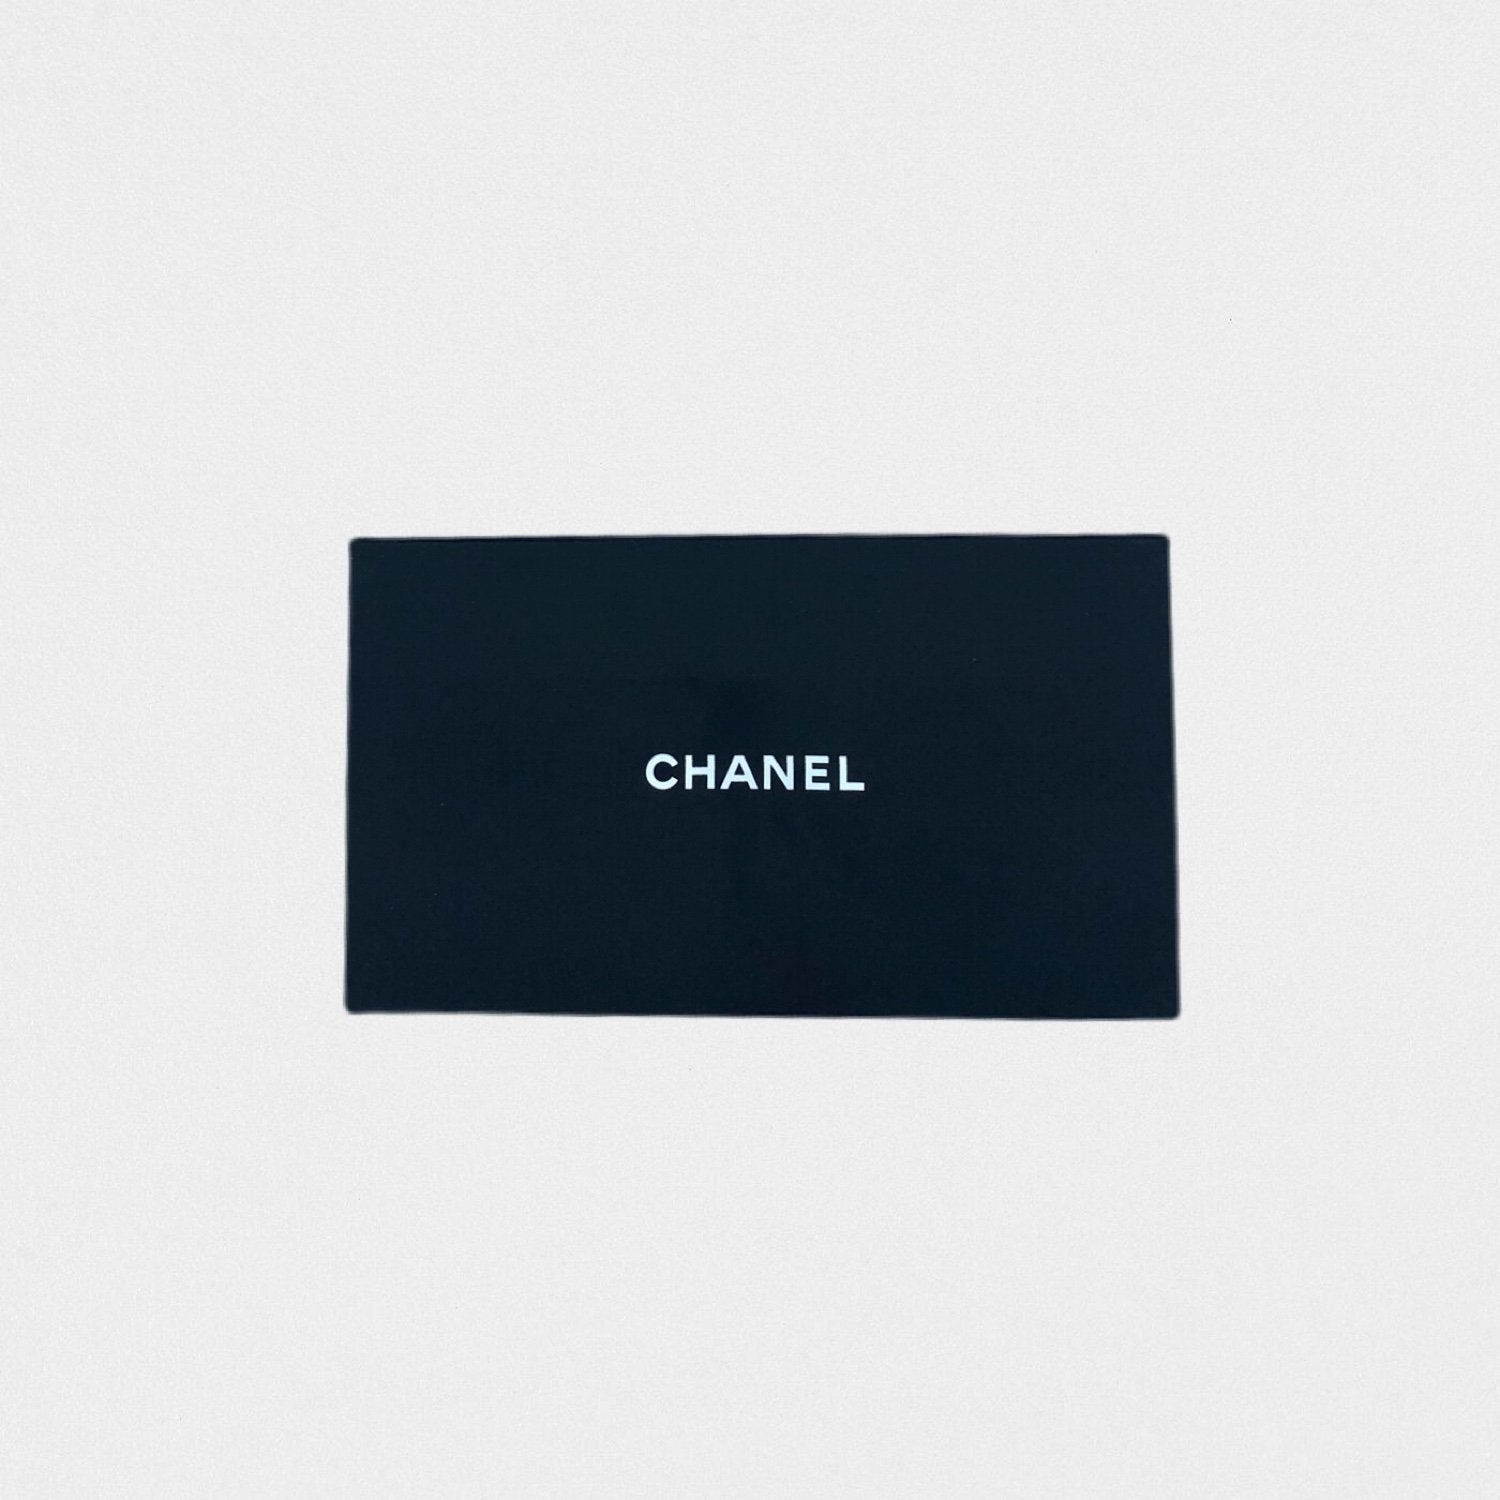 Lysis vintage Chanel phone pouch - 2019